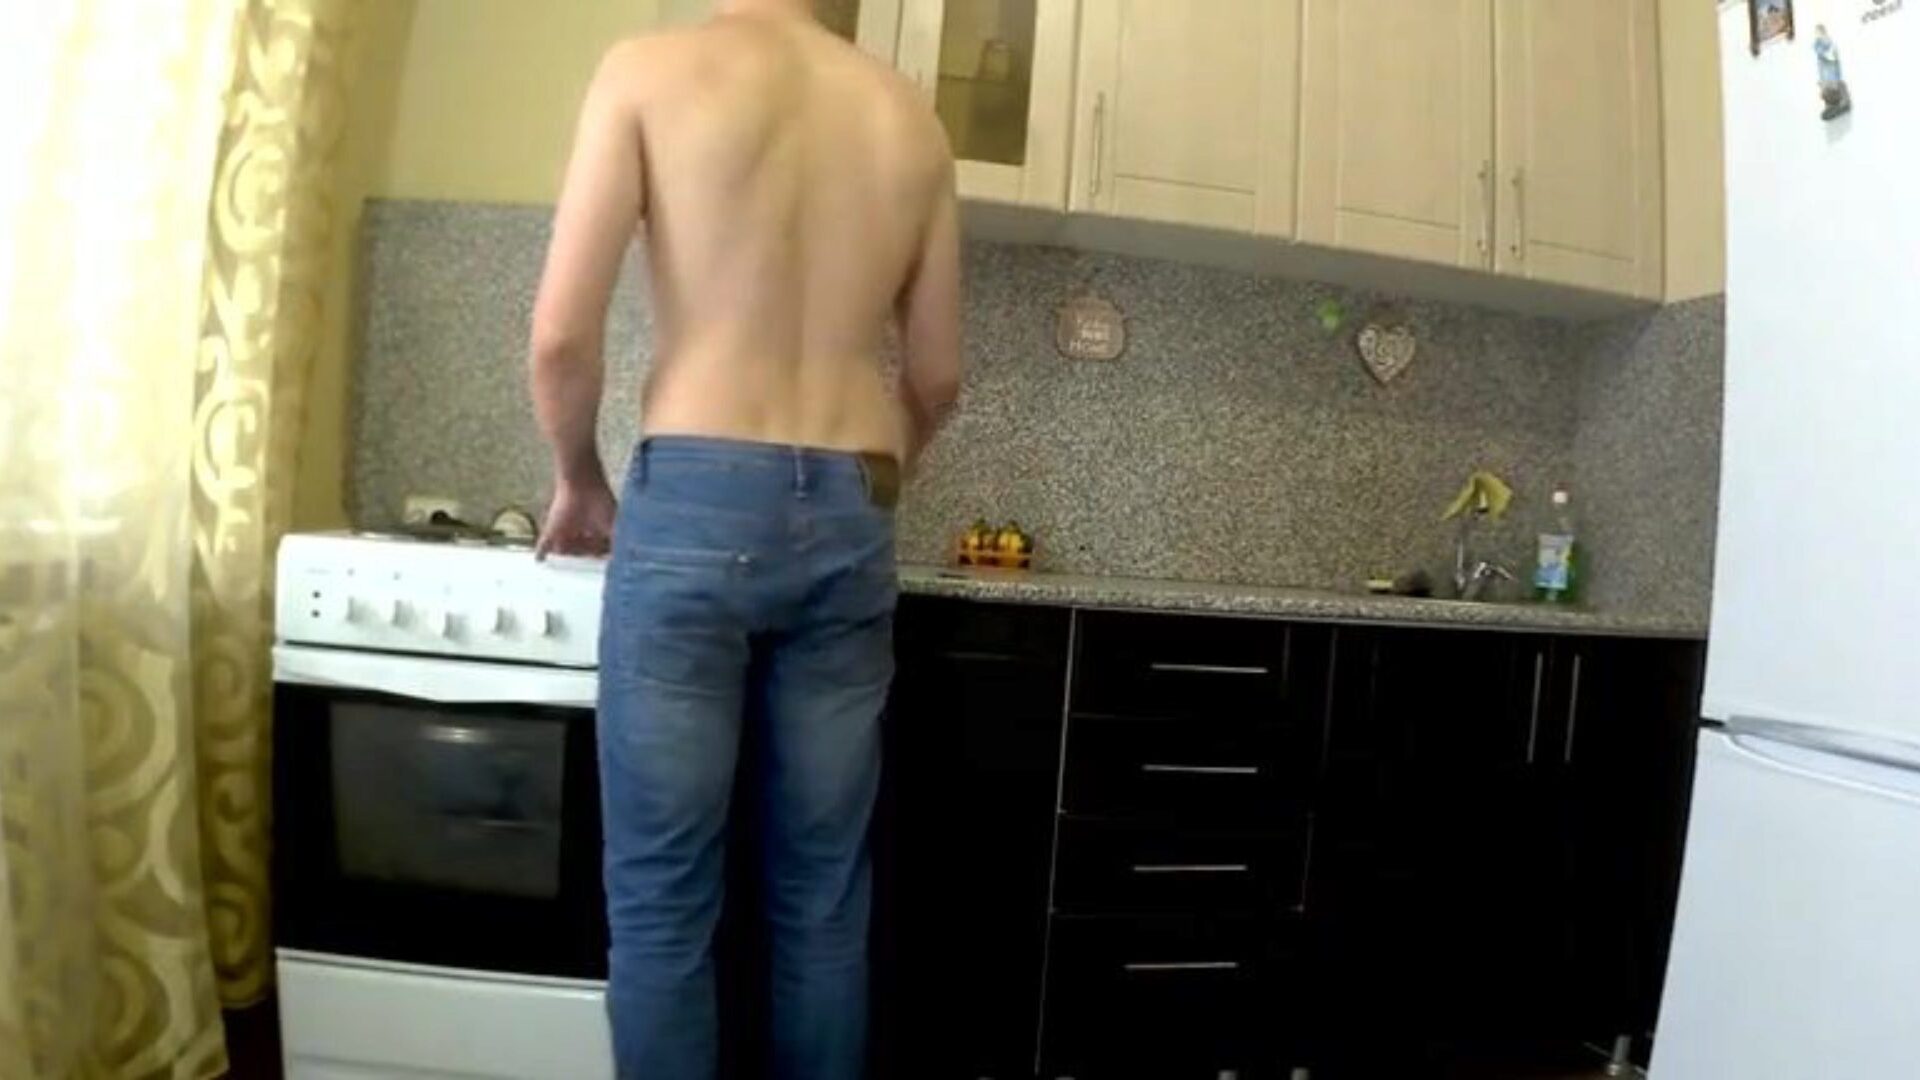 Mom And Son In Kitchen - XXX BULE